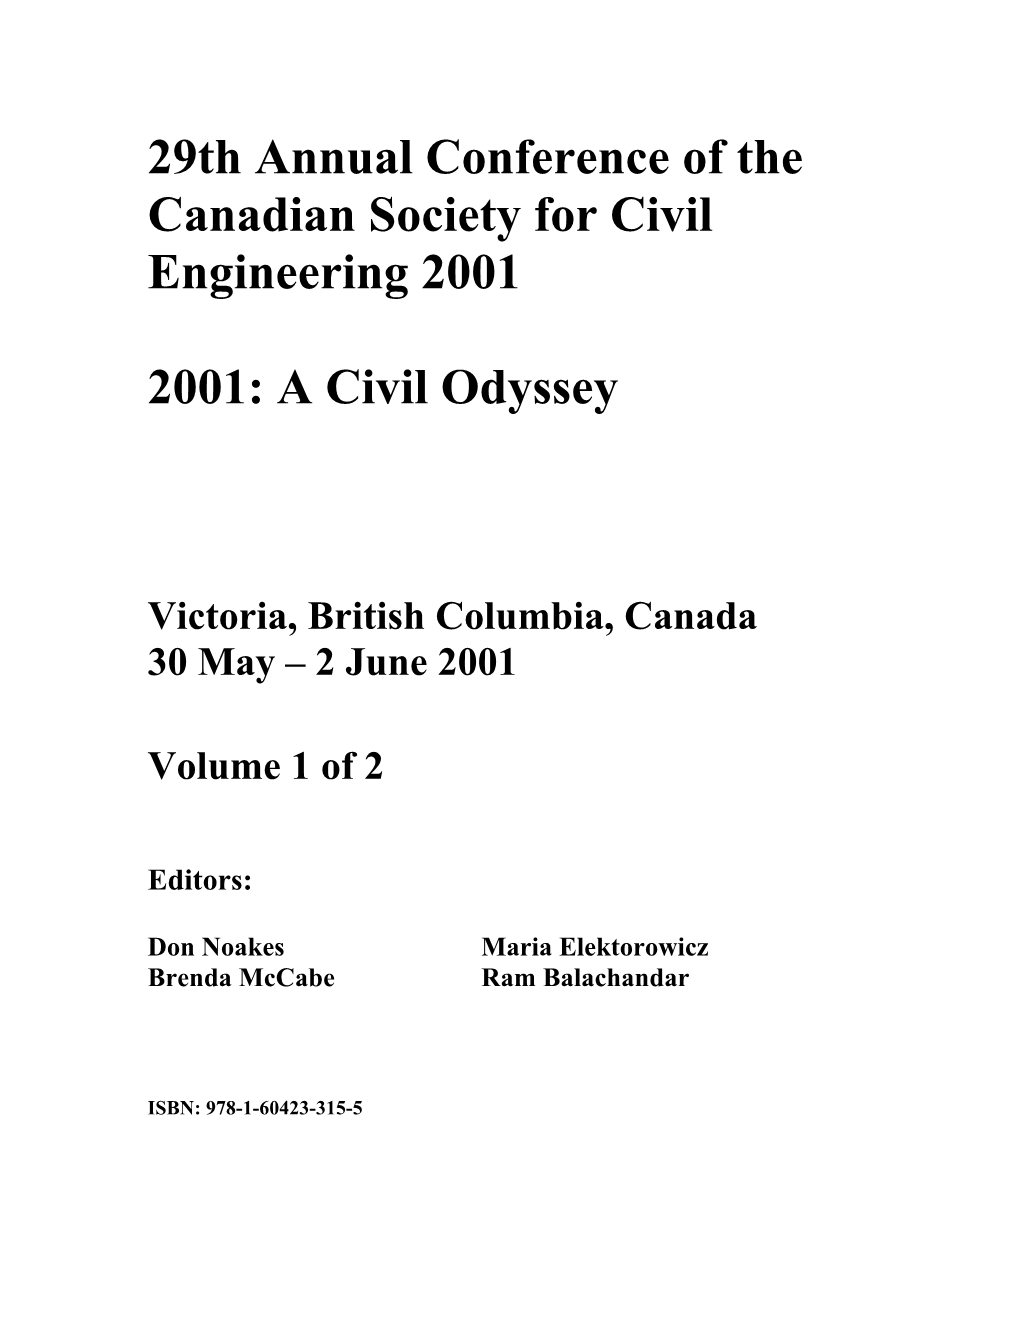 29Th Annual Conference of the Canadian Society for Civil Engineering 2001